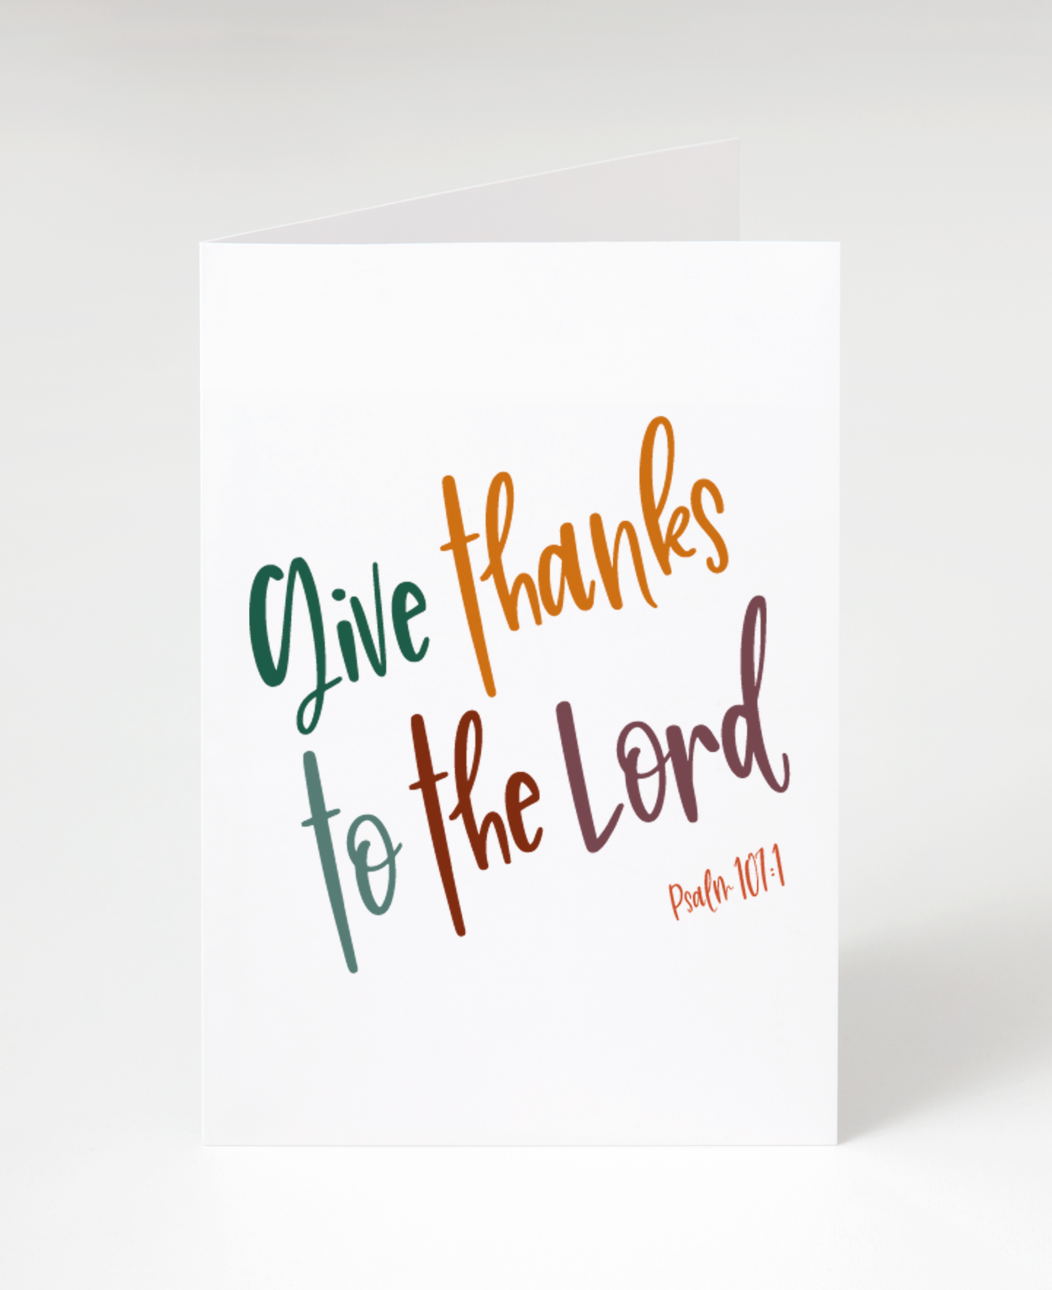 Give thanks to the Lord - Psalm 107:1 card